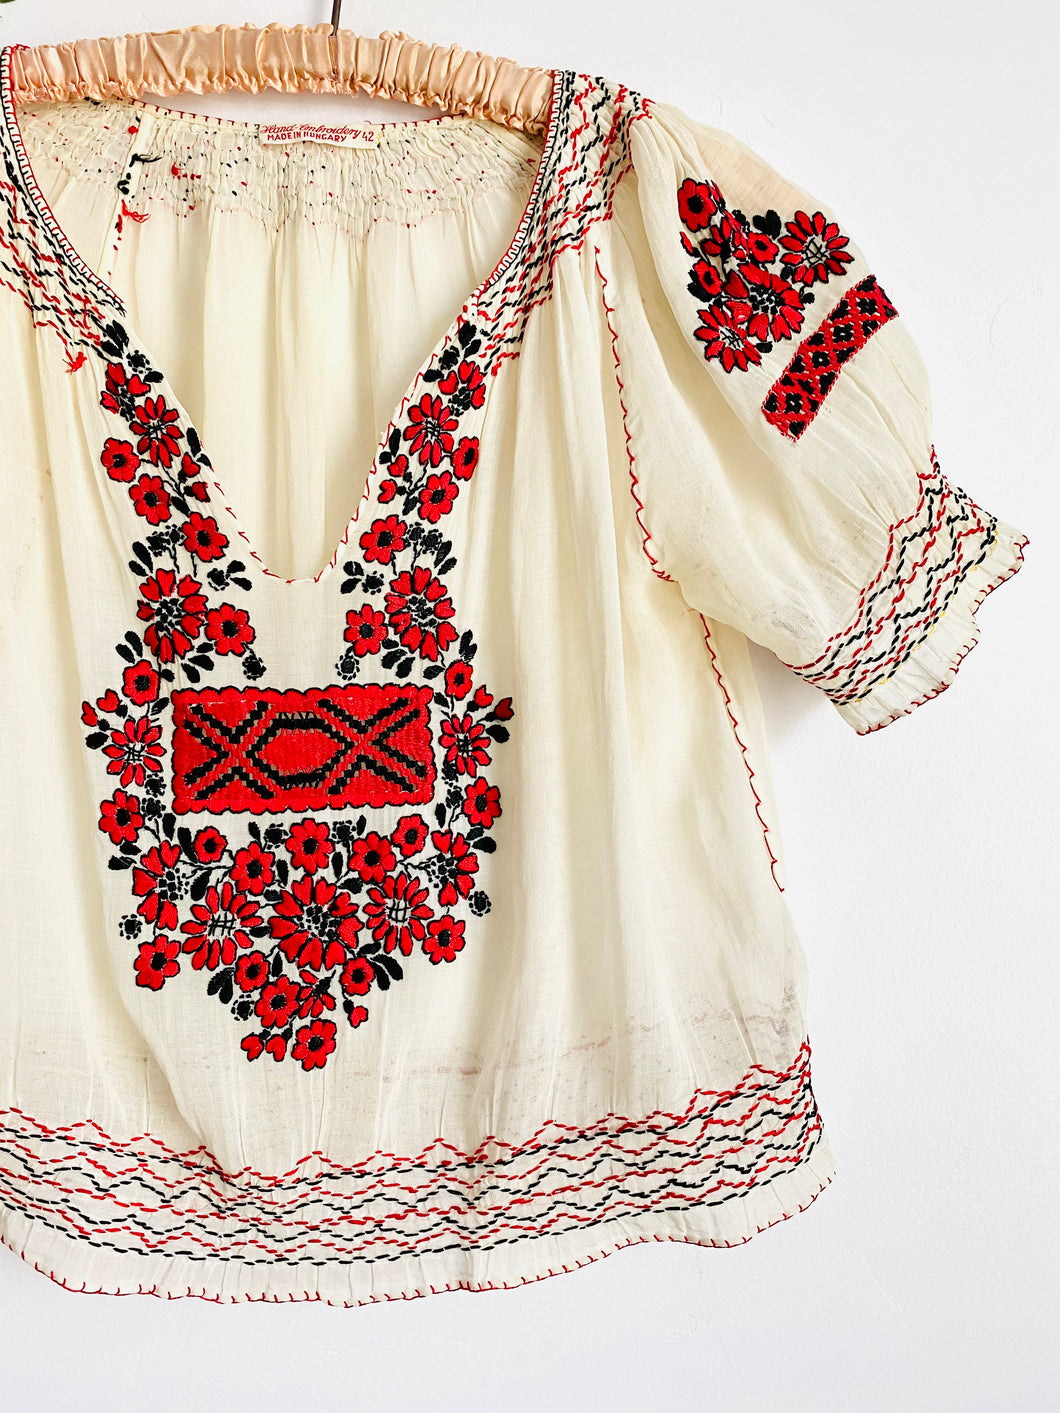 Vintage 1930s Hungarian Embroidered Peasant Blouse